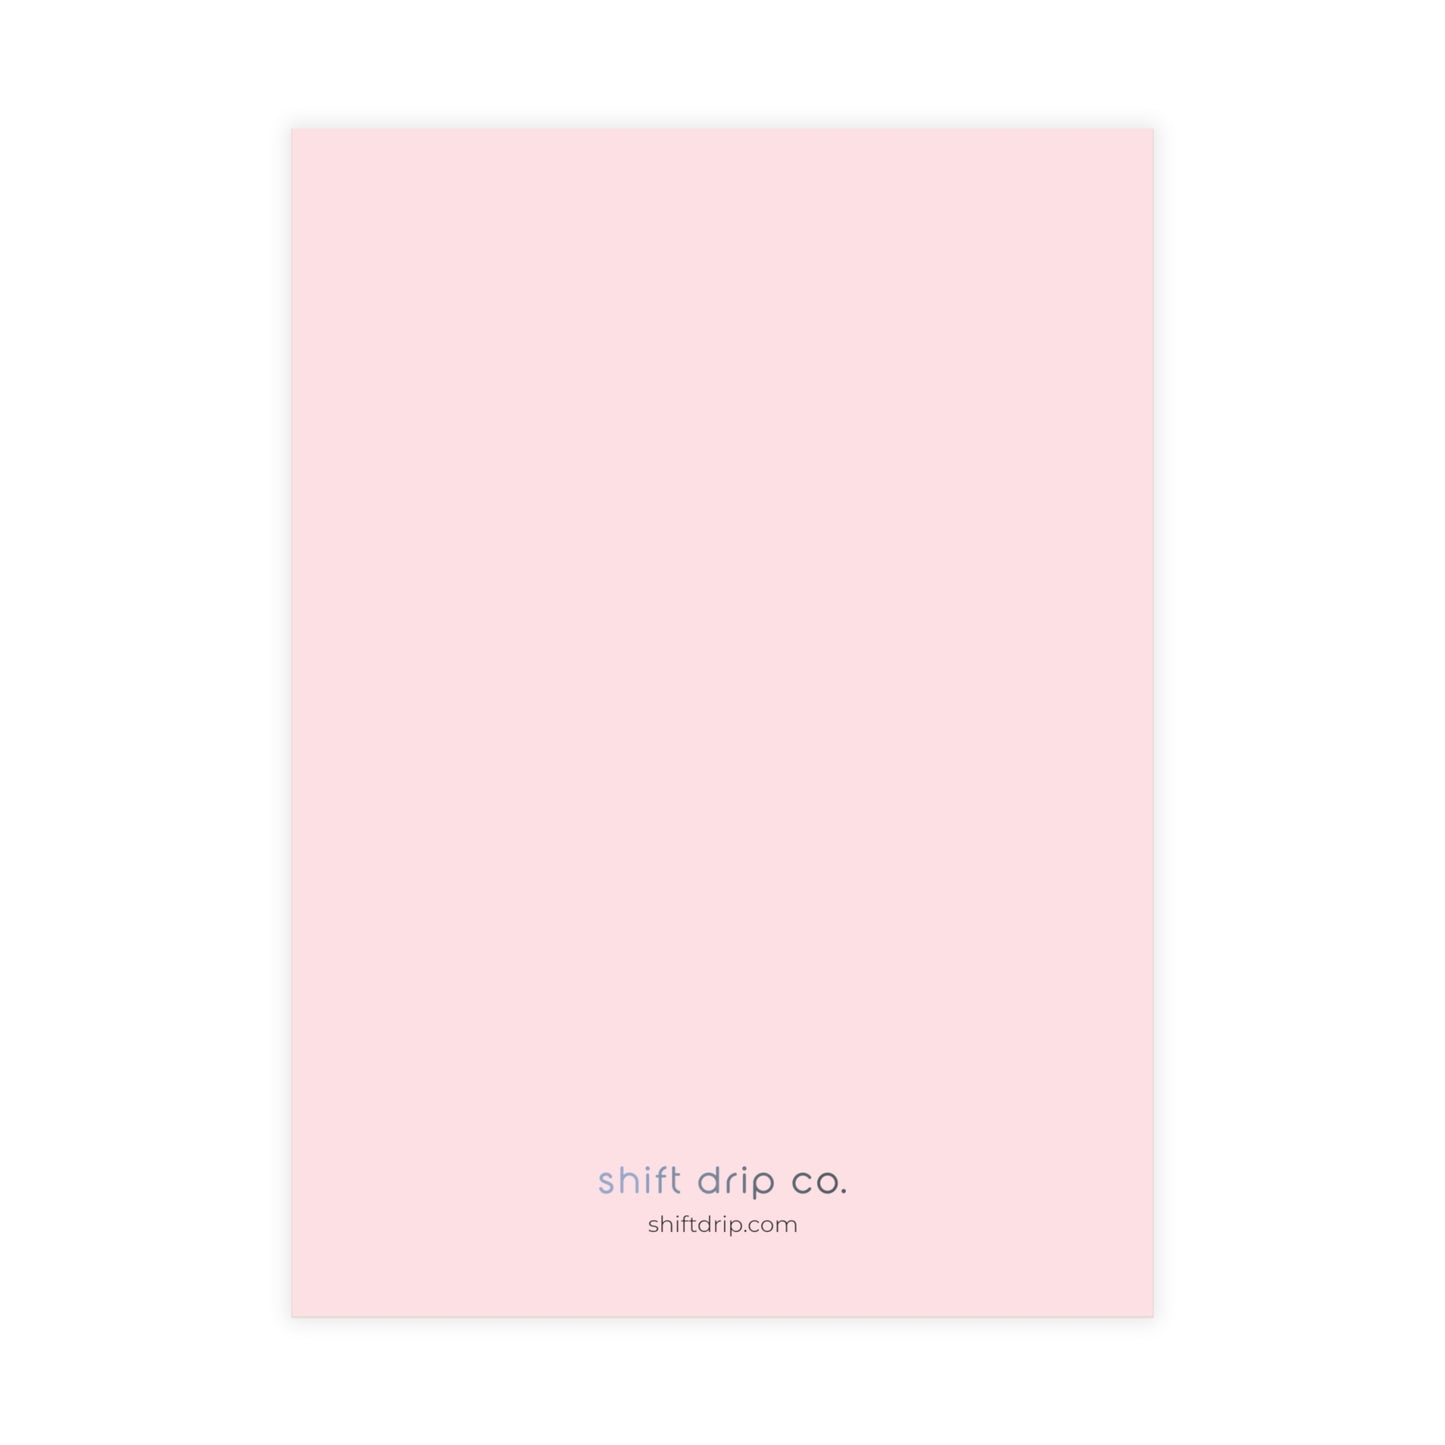 Can't Get A Neph Of You Greeting Card – Shift Drip Co.